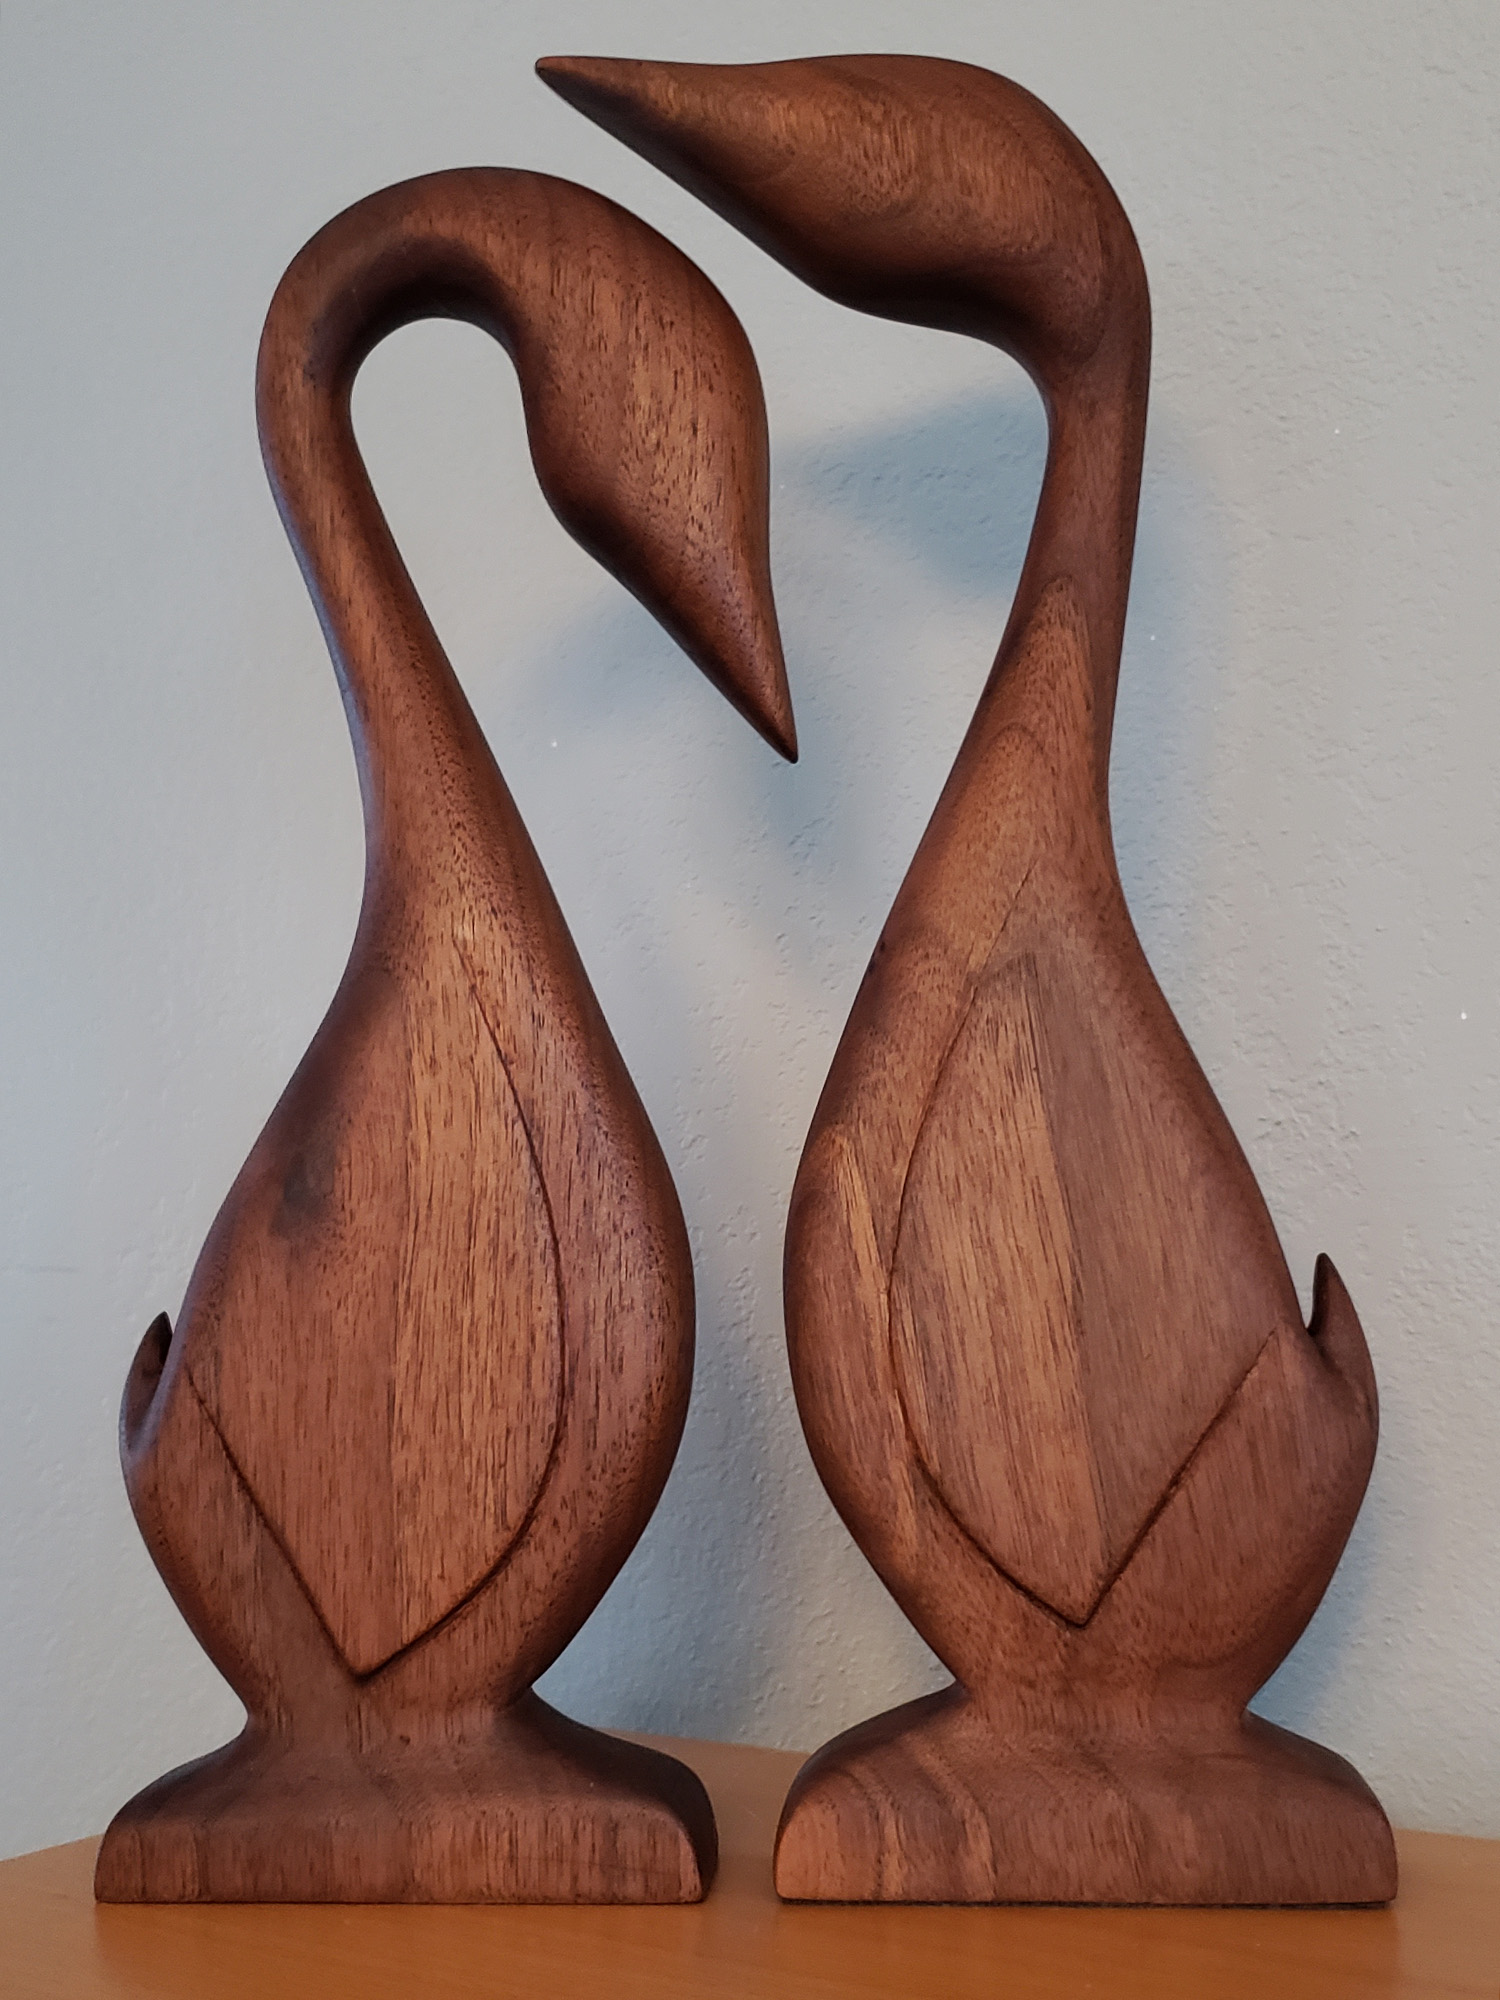 Two wooden geese facing each other